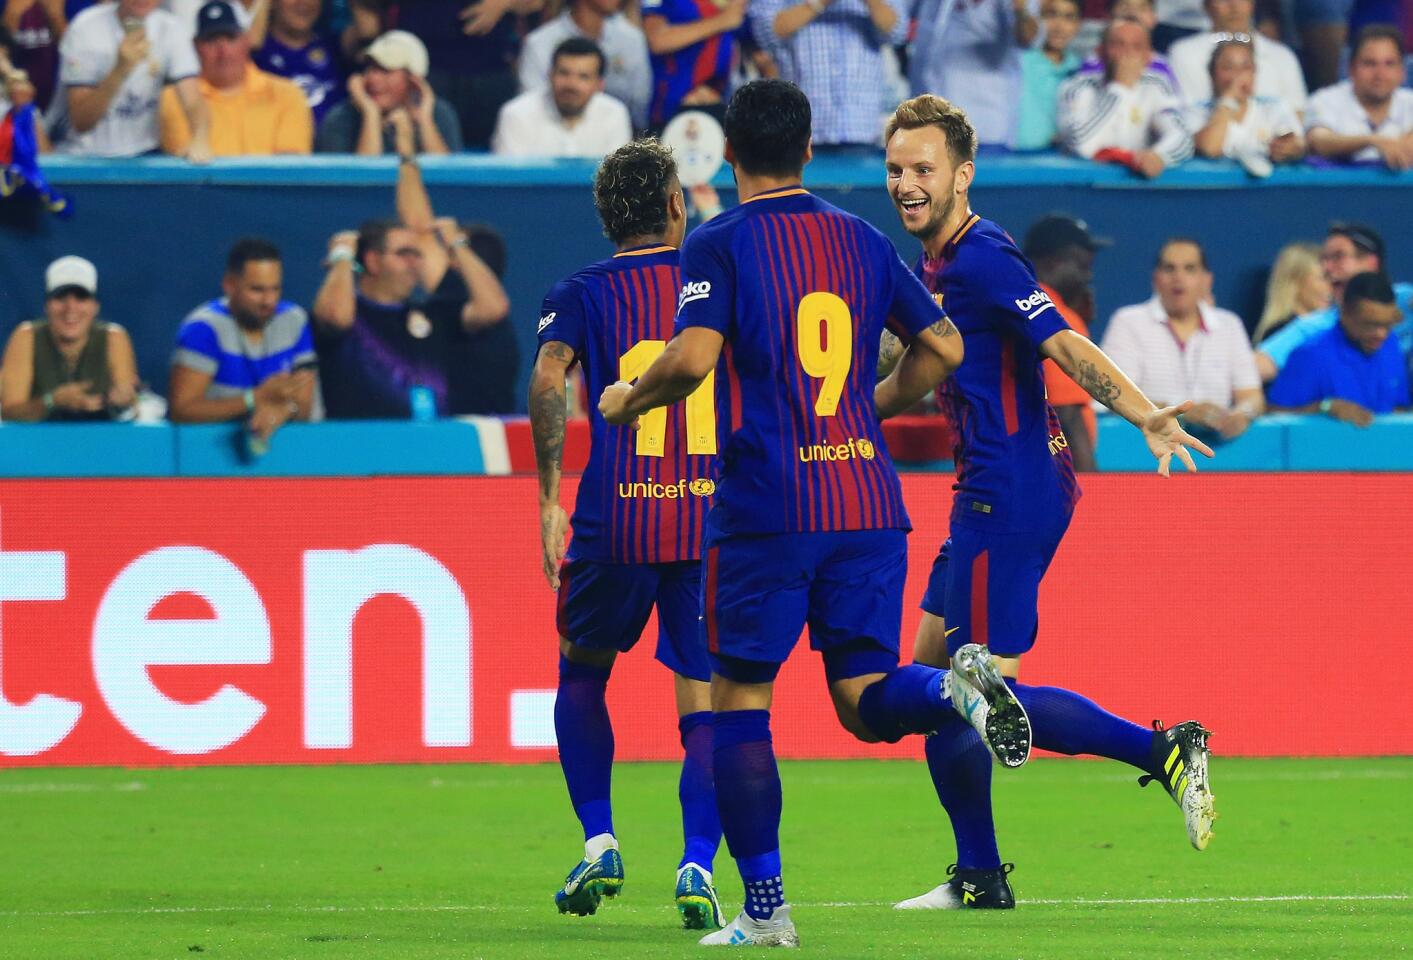 MIAMI GARDENS, FL - JULY 29: Ivan Rakitic #4 of Barcelona celebrates his goal with teammates Neymar #11 and Luis Suarez #9 in the first half against the Real Madrid during their International Champions Cup 2017 match at Hard Rock Stadium on July 29, 2017 in Miami Gardens, Florida. (Photo by Chris Trotman/Getty Images) ** OUTS - ELSENT, FPG, CM - OUTS * NM, PH, VA if sourced by CT, LA or MoD **